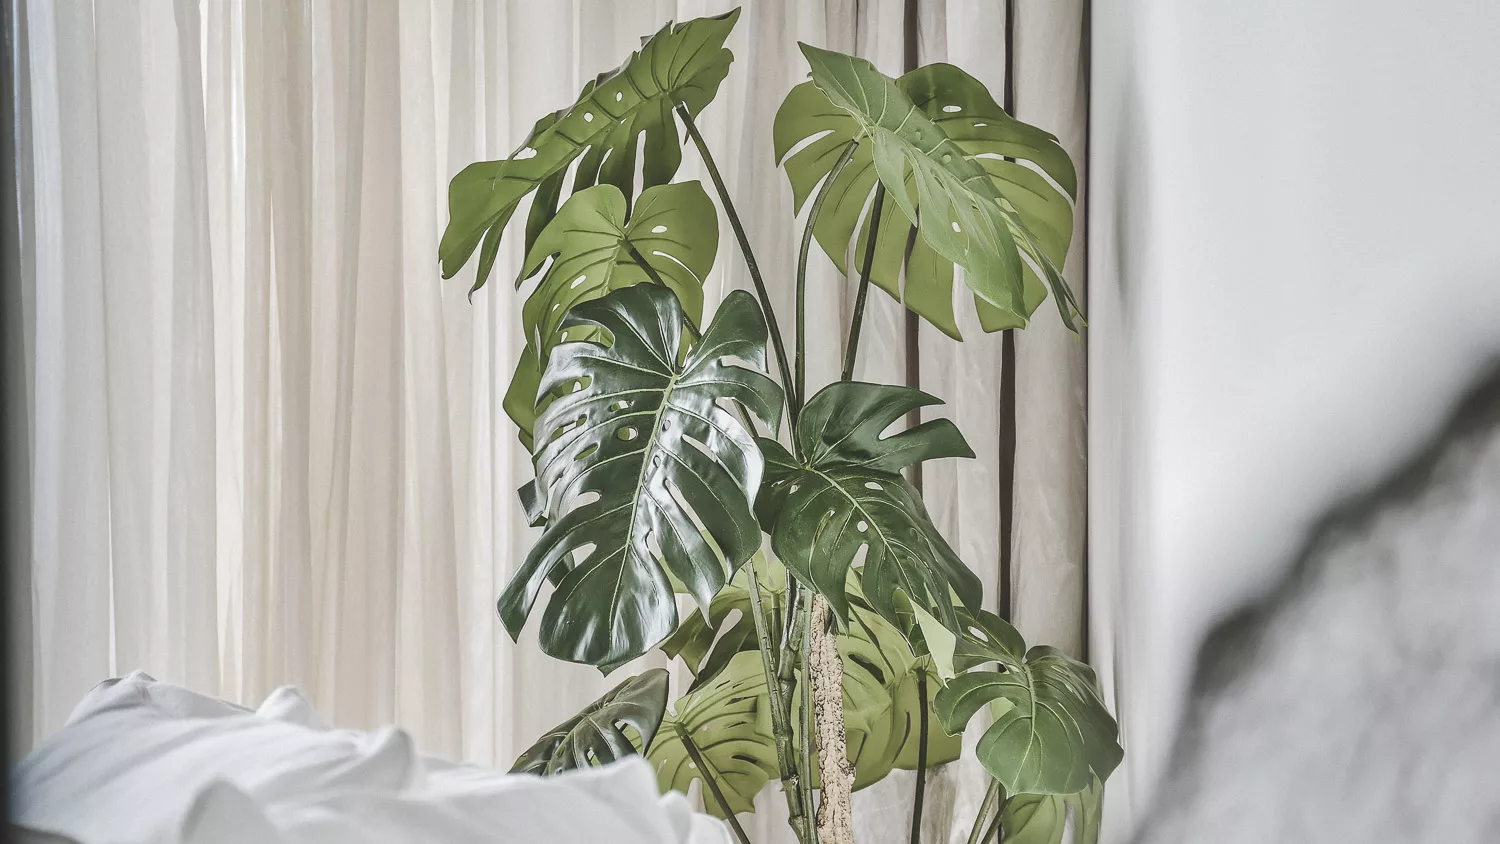 Monstera or Areca Palm can transform your house into a tropical paradise.